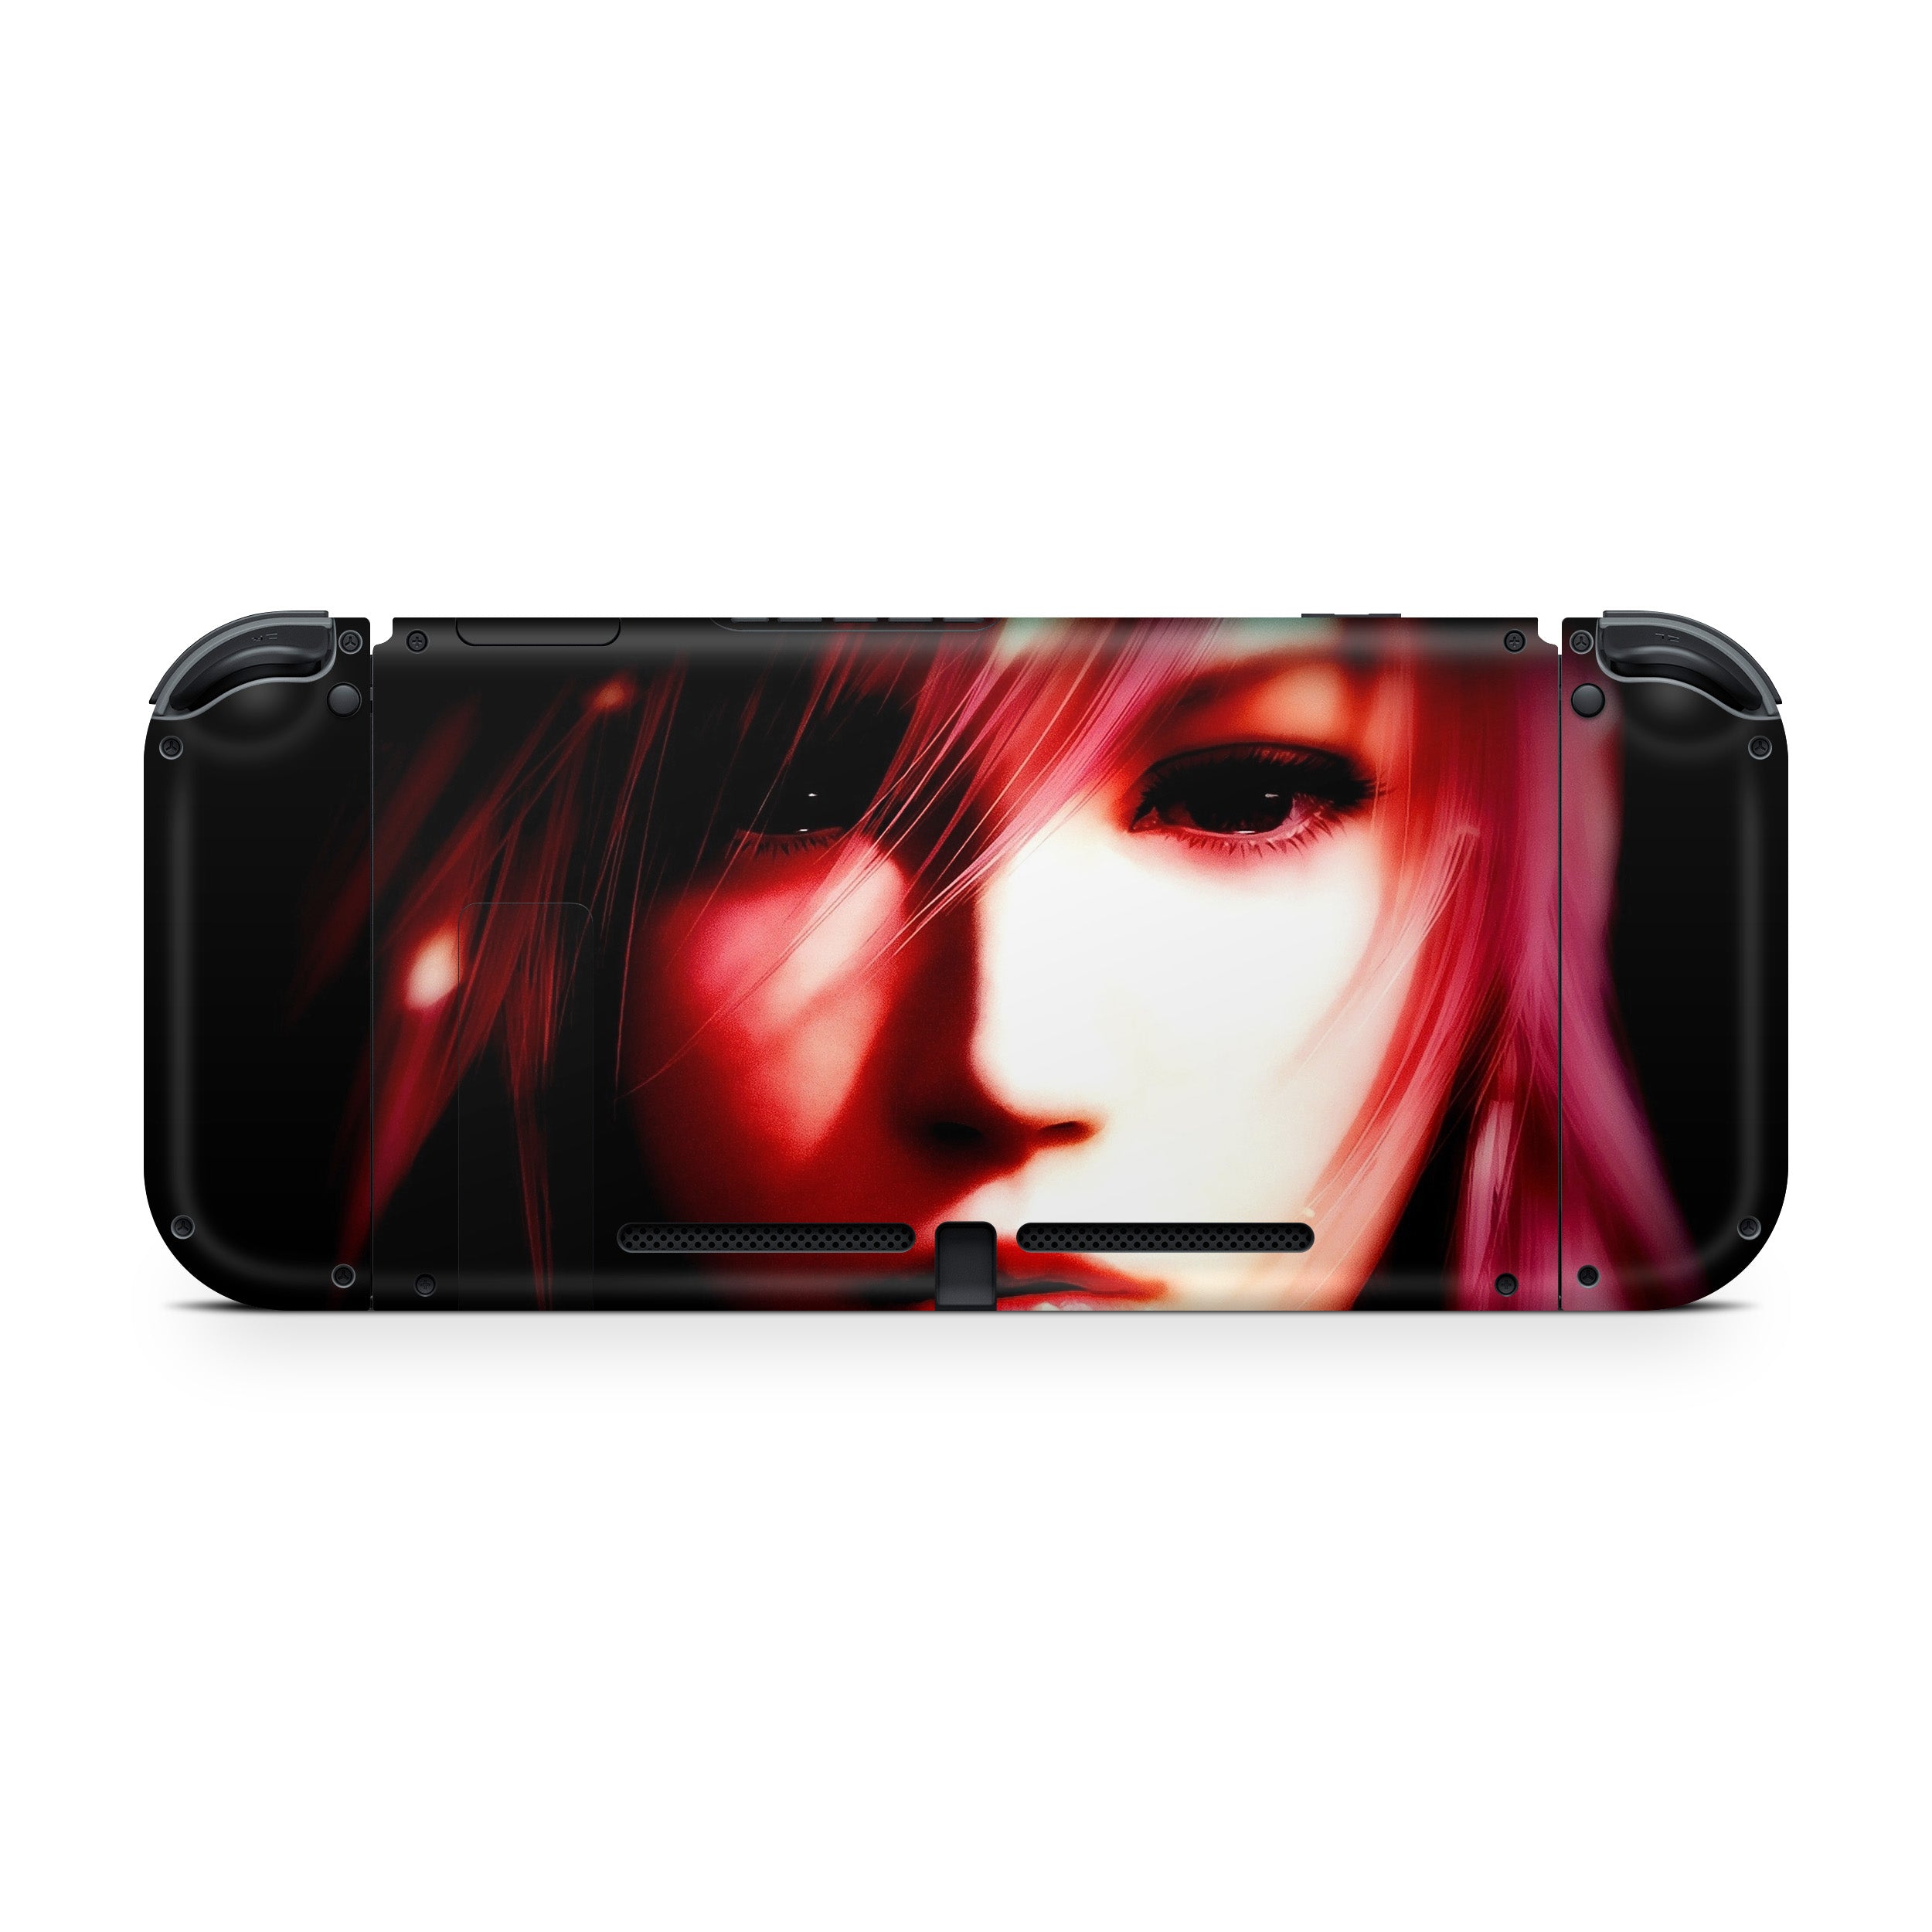 A video game skin featuring a Final Fantasy 13 Lightning design for the Nintendo Switch.